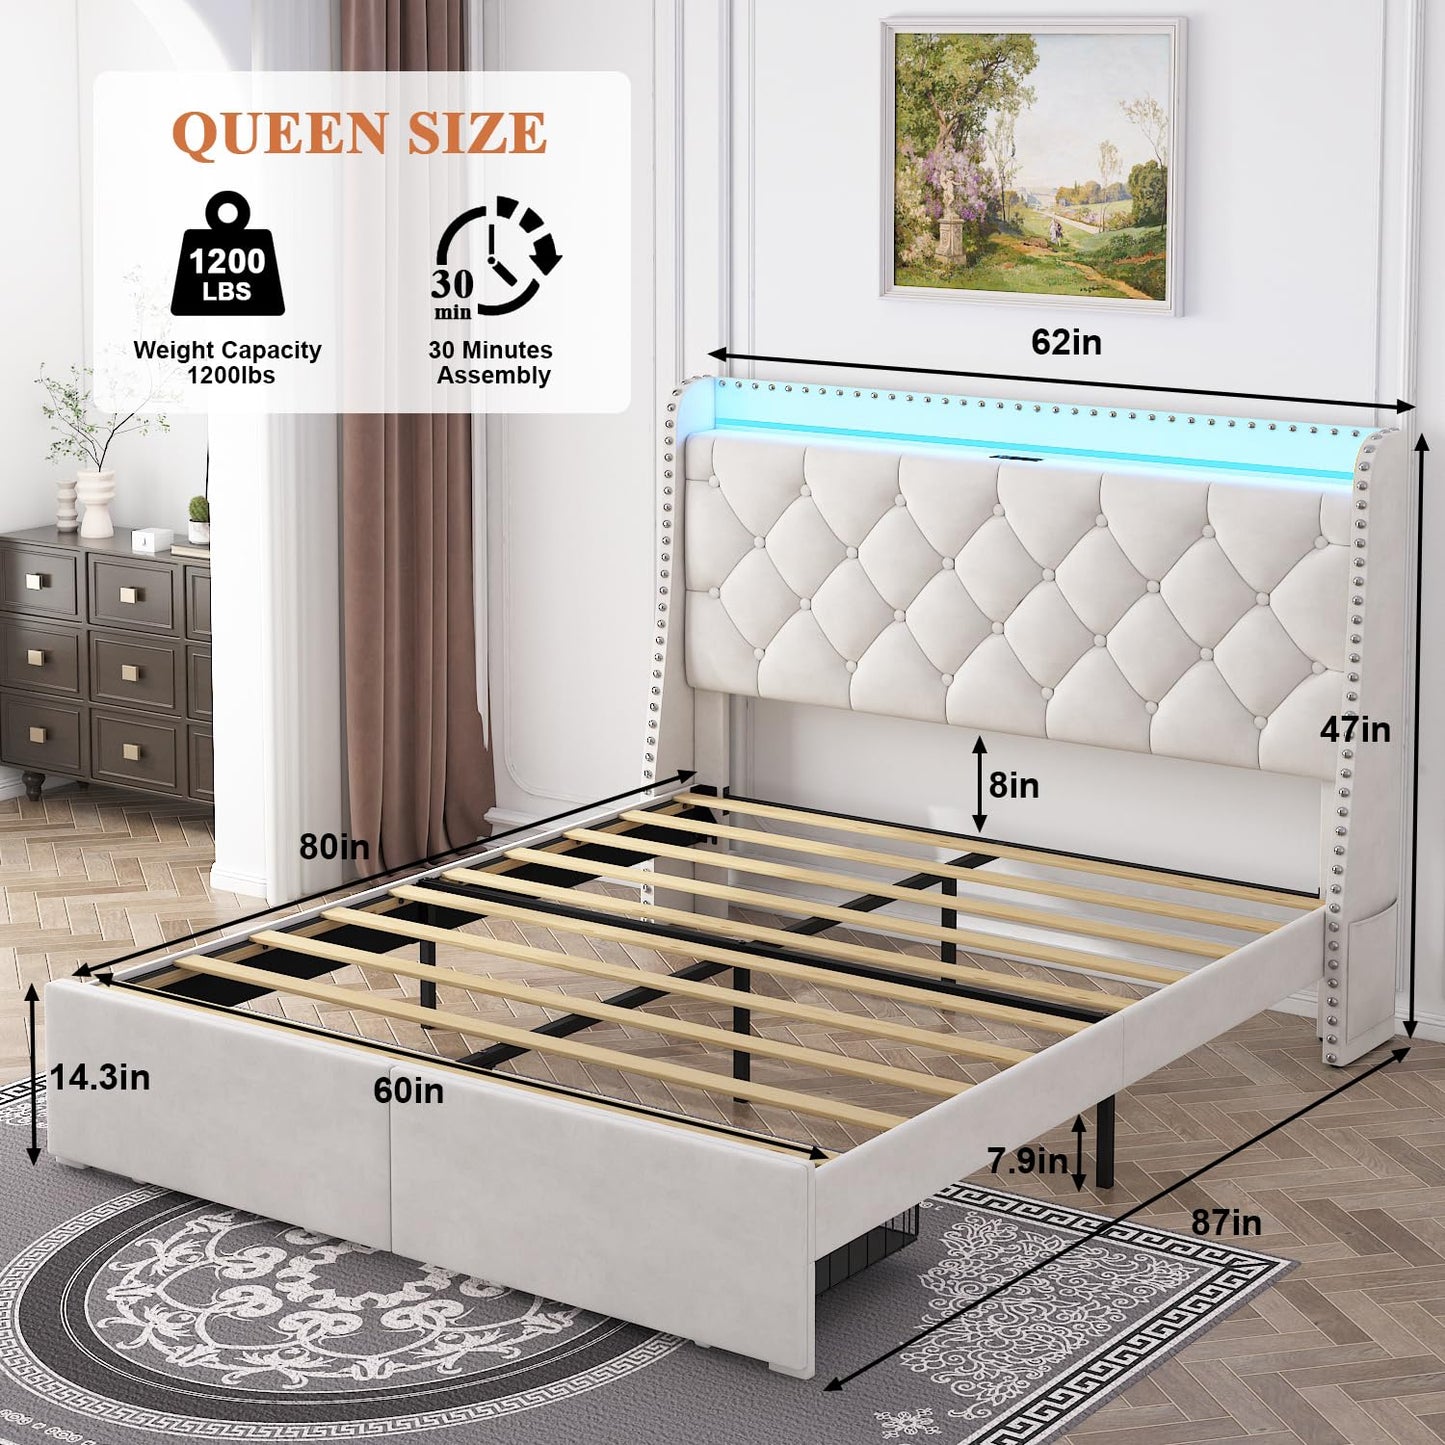 TIGUBFRE Queen Size Bed Frame with Storage Drawers, Upholstered Bed Frame with Wingback Diamond Tufted Headboard, LED Lights, Wood Slats Support, Easy Assembly, No Box Spring Needed, Beige